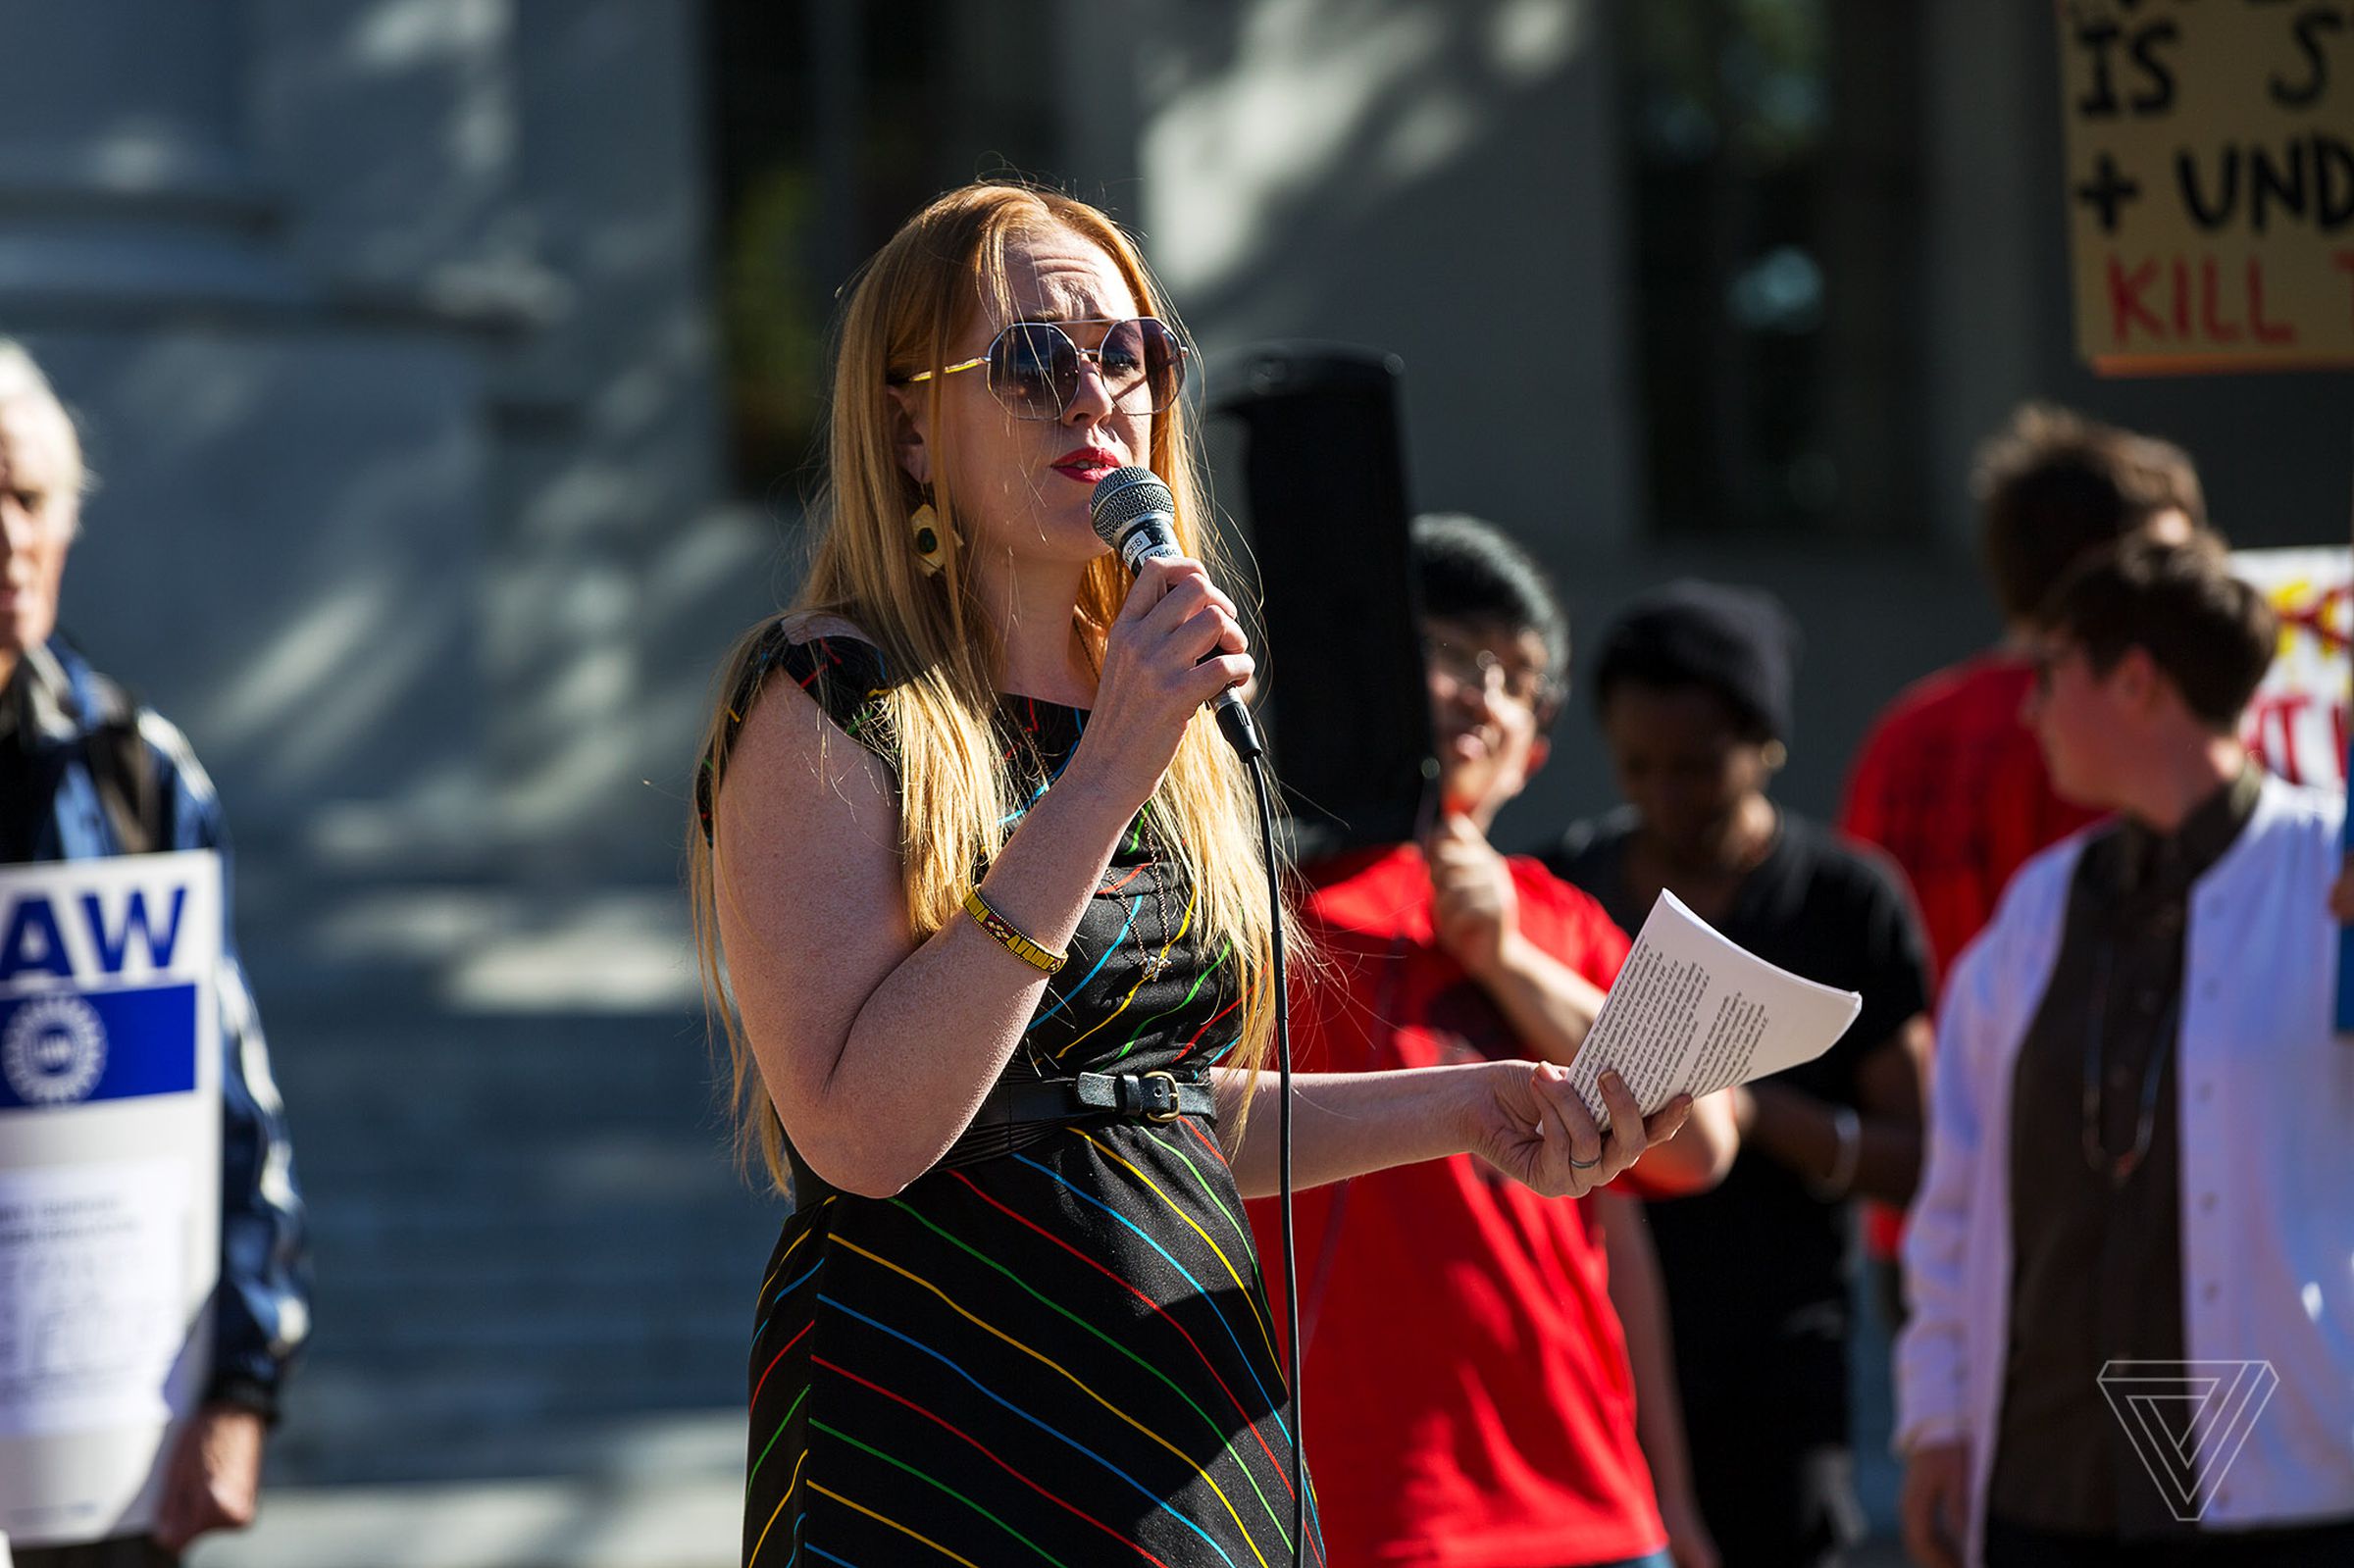 Lydia Majure, a postdoctoral neuroscientist, addressed the crowd at Wednesday’s protests. Taxing grad student tuition waivers “would be terrible for education and for research,” she says. “A lot of breakthroughs wouldn't happen because of it.”